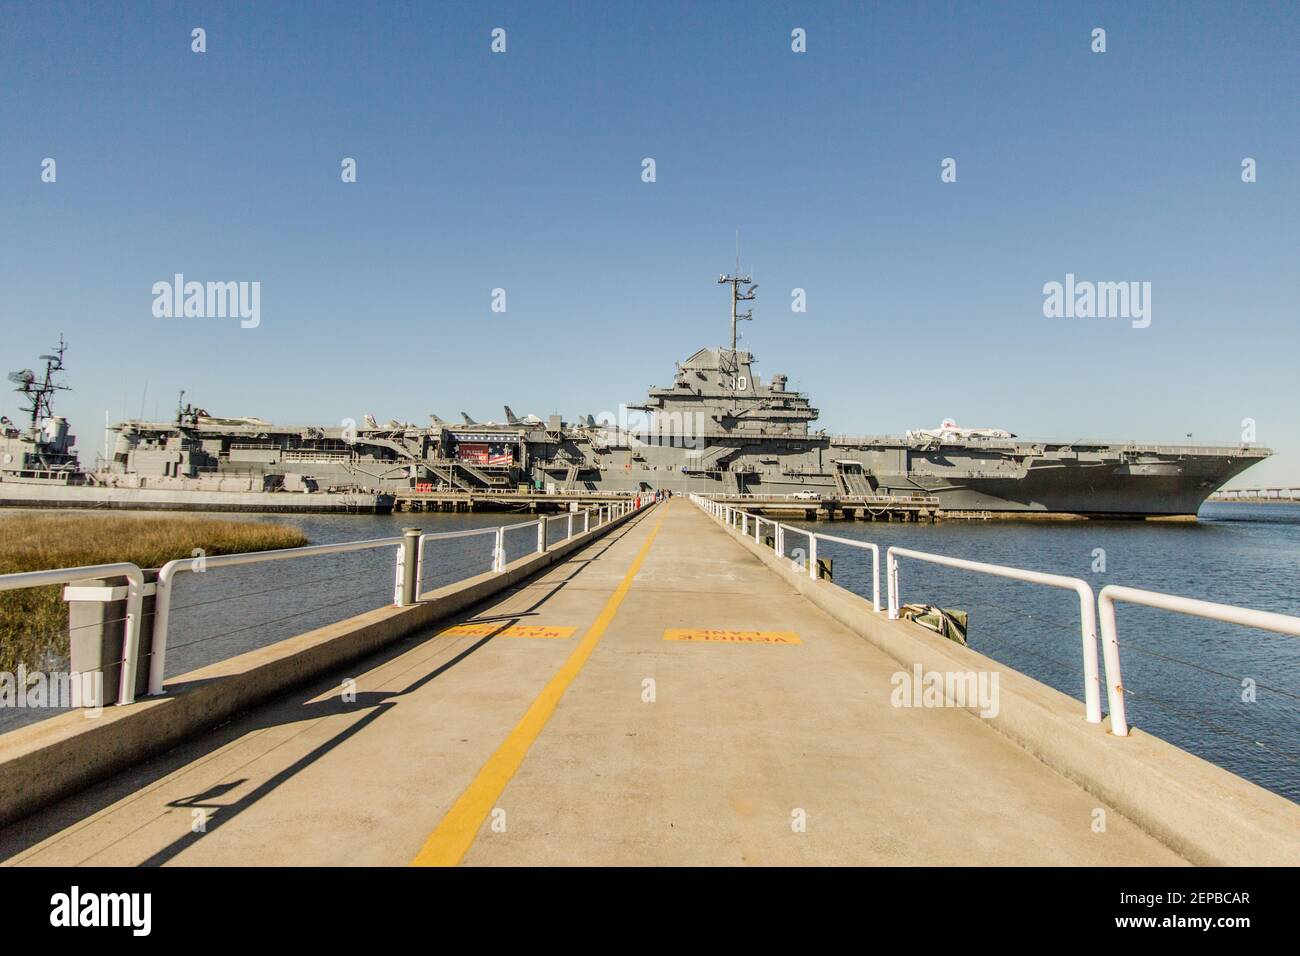 Mount Pleasant, South Carolina, USA - February 21, 2021 - The USS Yorktown aircraft carrier now operates as a museum and memorial at Patriots Point. Stock Photo